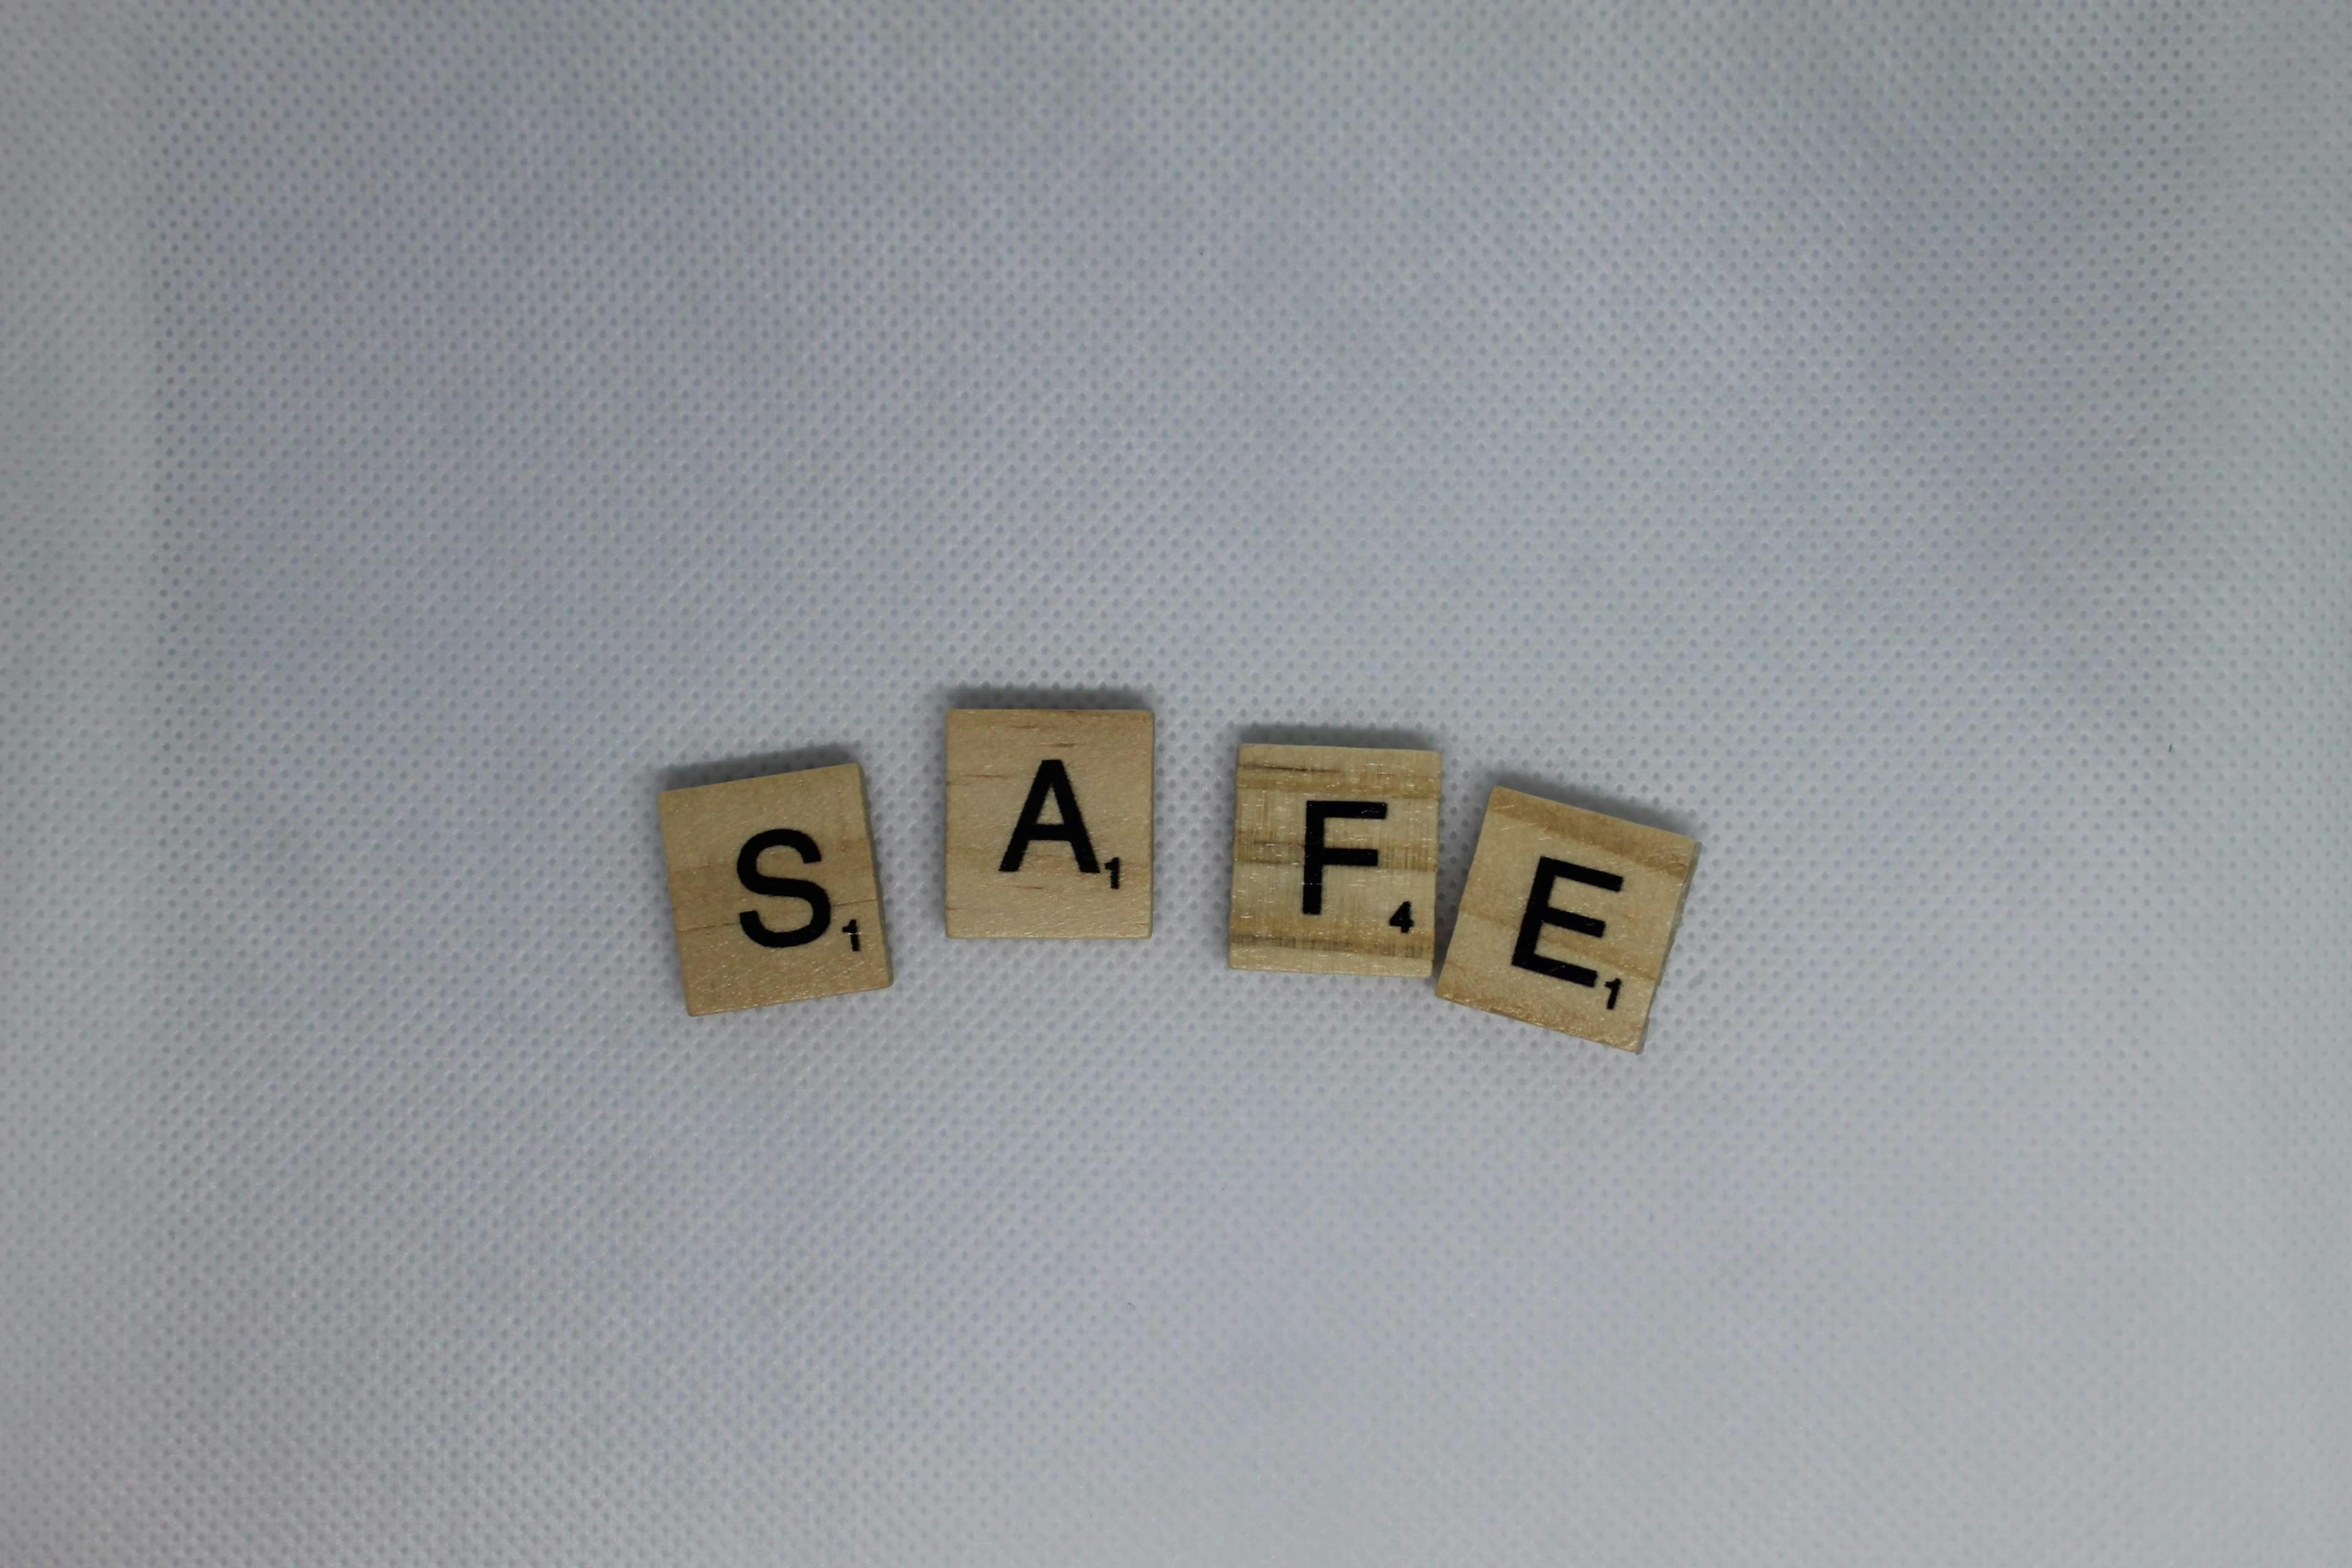 5 ways to Meet Safety and Safeguarding Standards | Leverage Technology